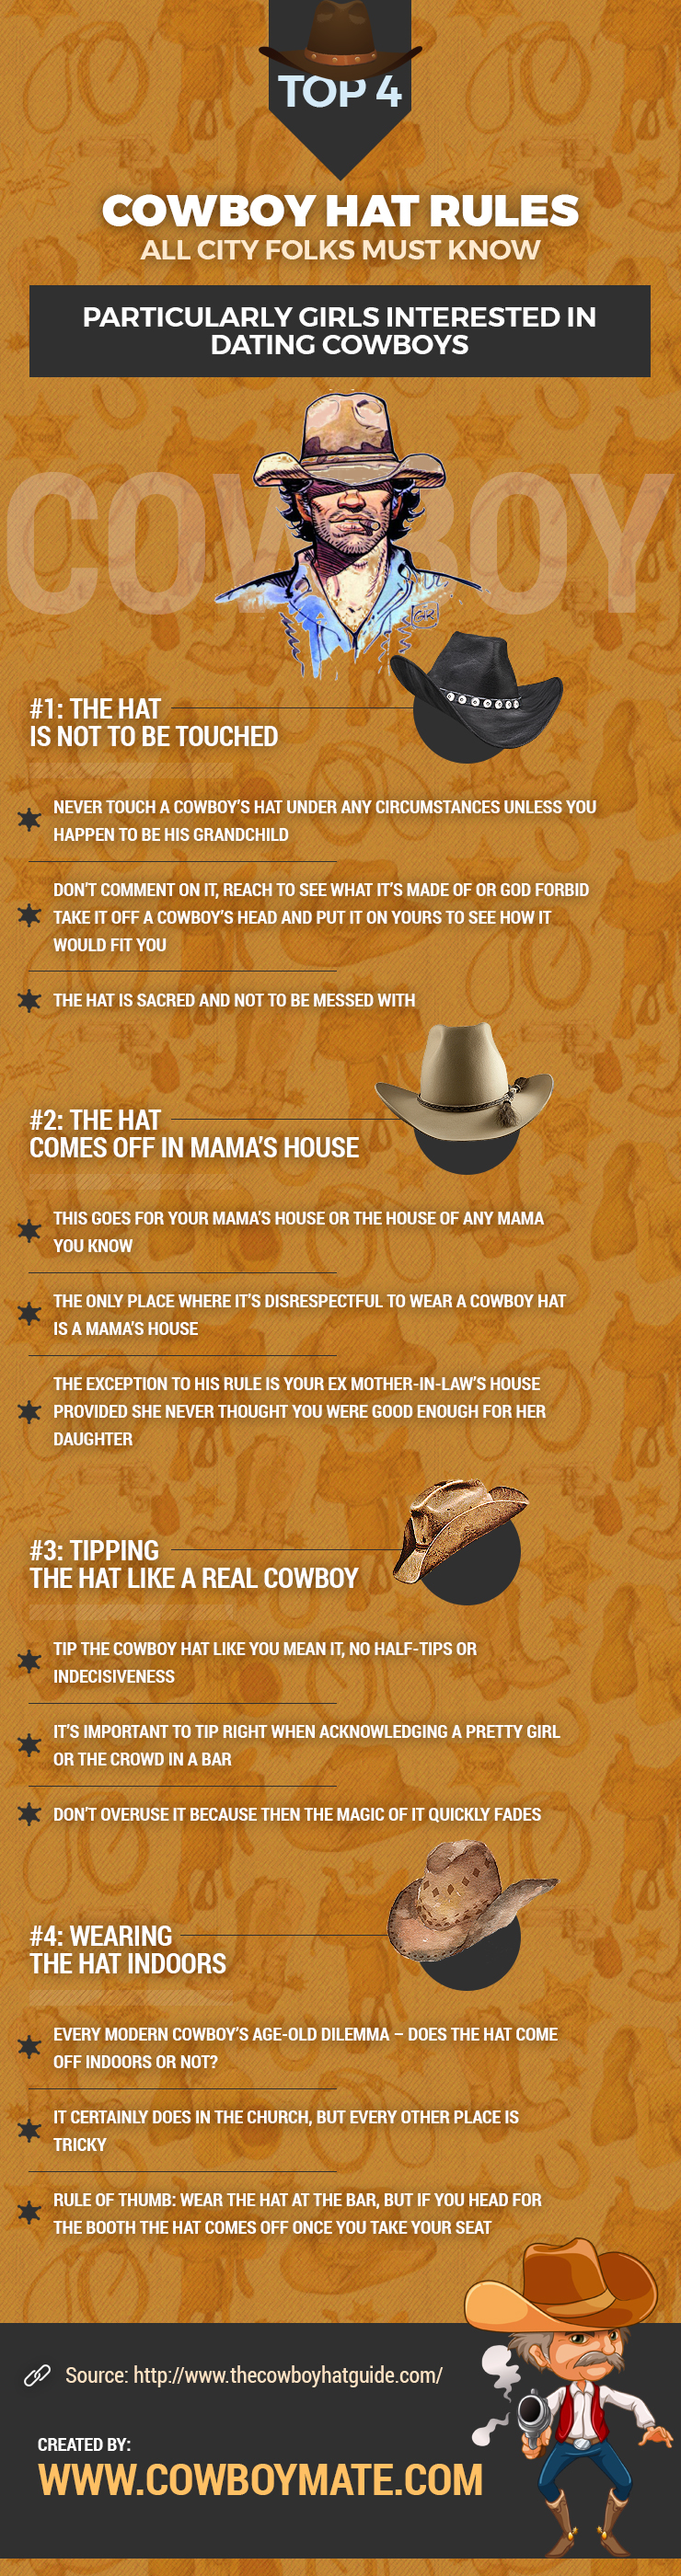 Top 4 Cowboy Hat Rules All City Folks Must Know